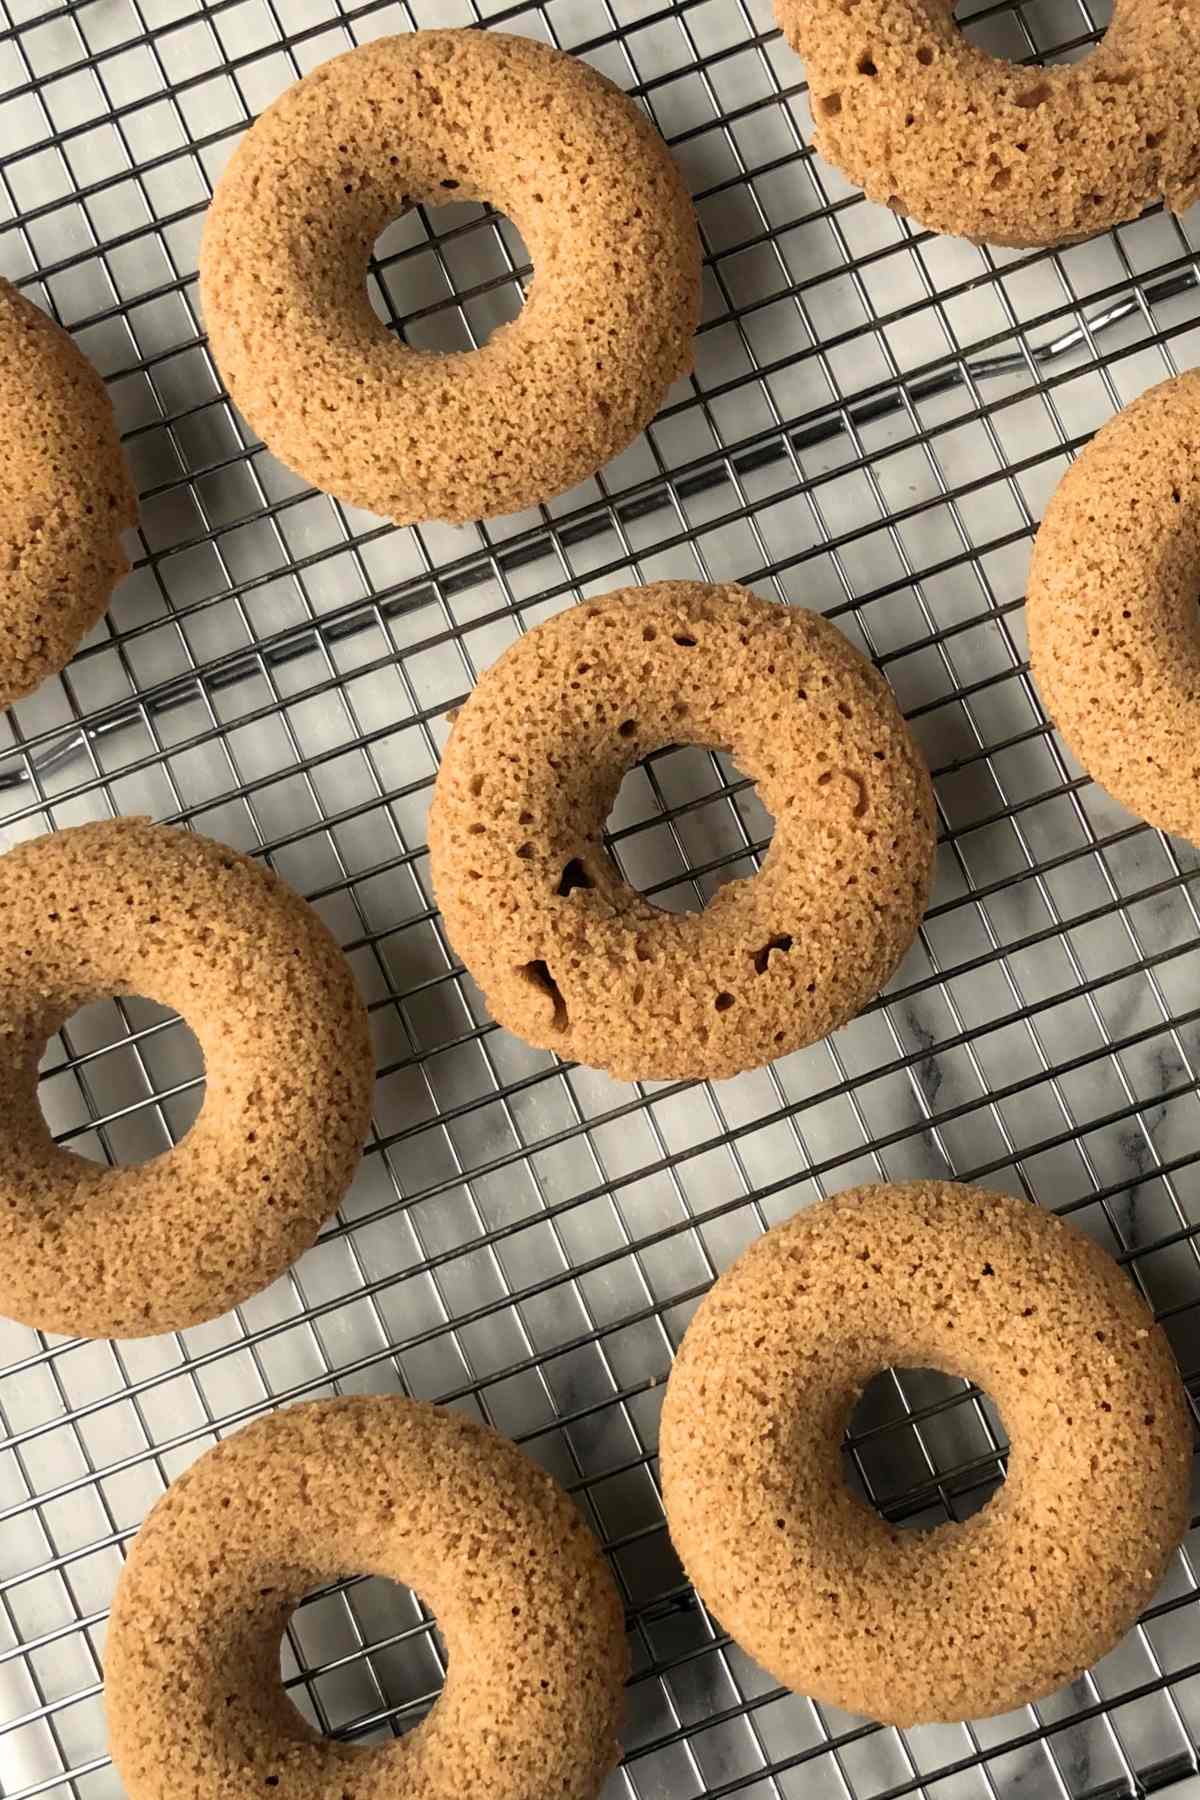 Baked apple cider donuts on a wire rack to cool.